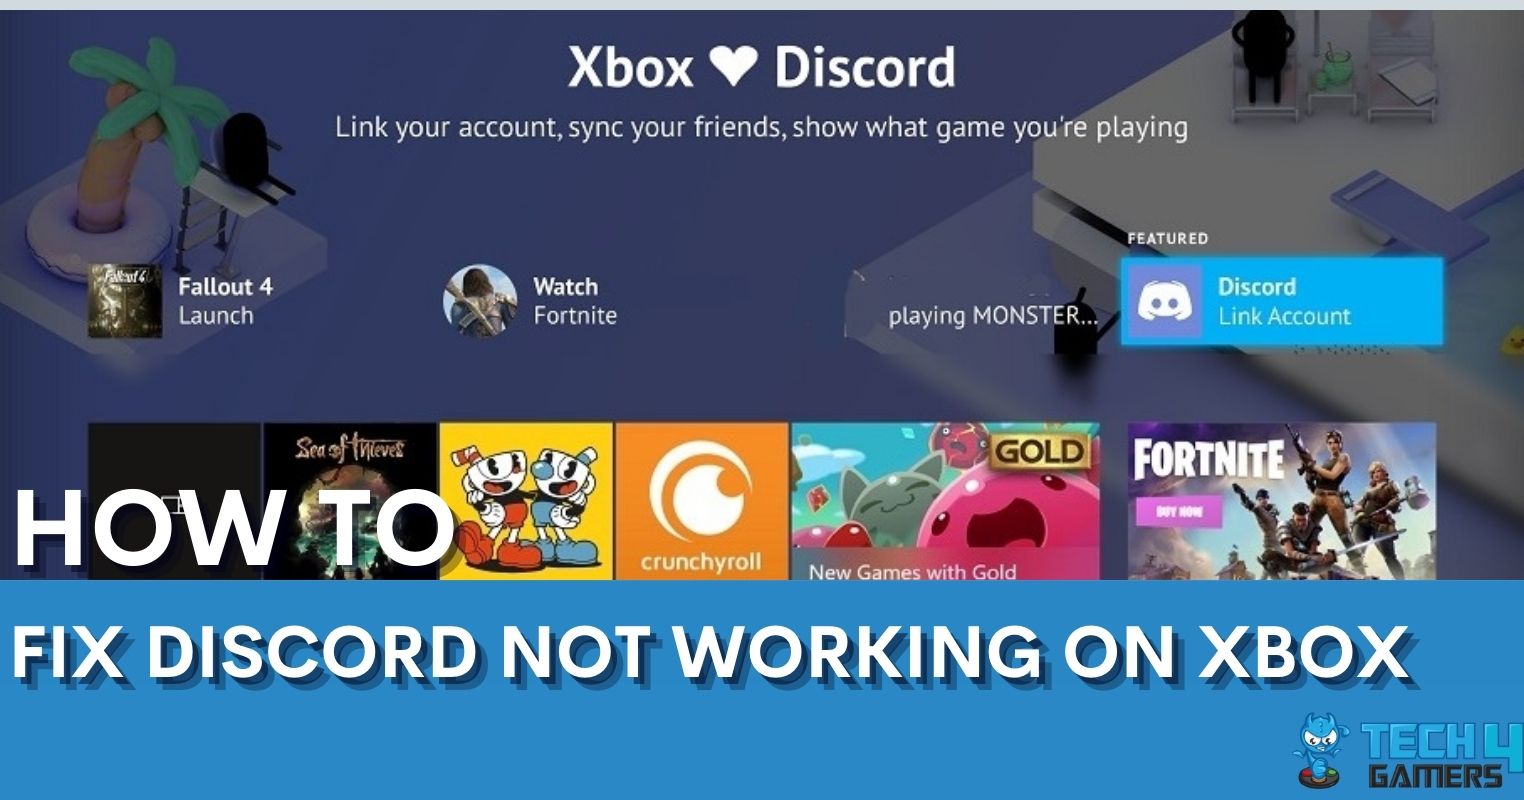 HOW TO fix discord not working on xbox